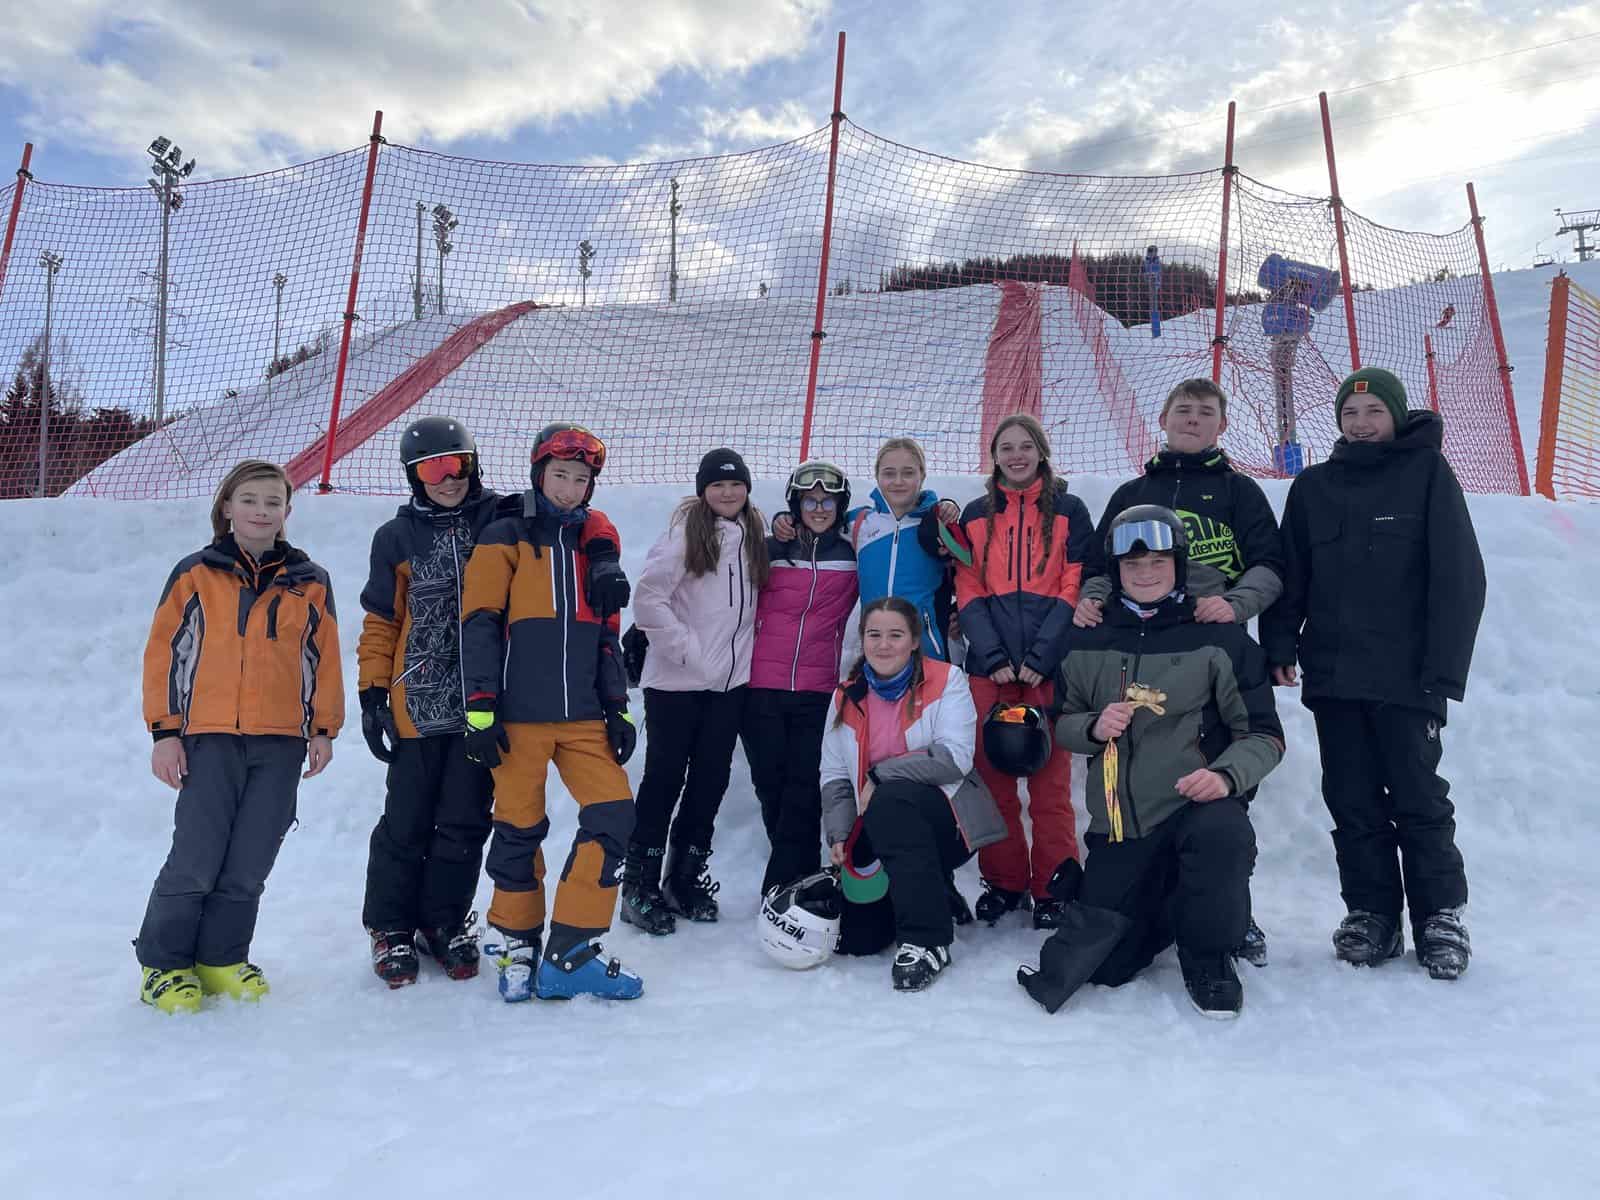 Kids X-Race<br /><h3 style='font-size: 16px; line-height: 16px !important; margin-top: 5px;'><span style='color: #800000;'>Skisport vom Feinsten .</span></h3>